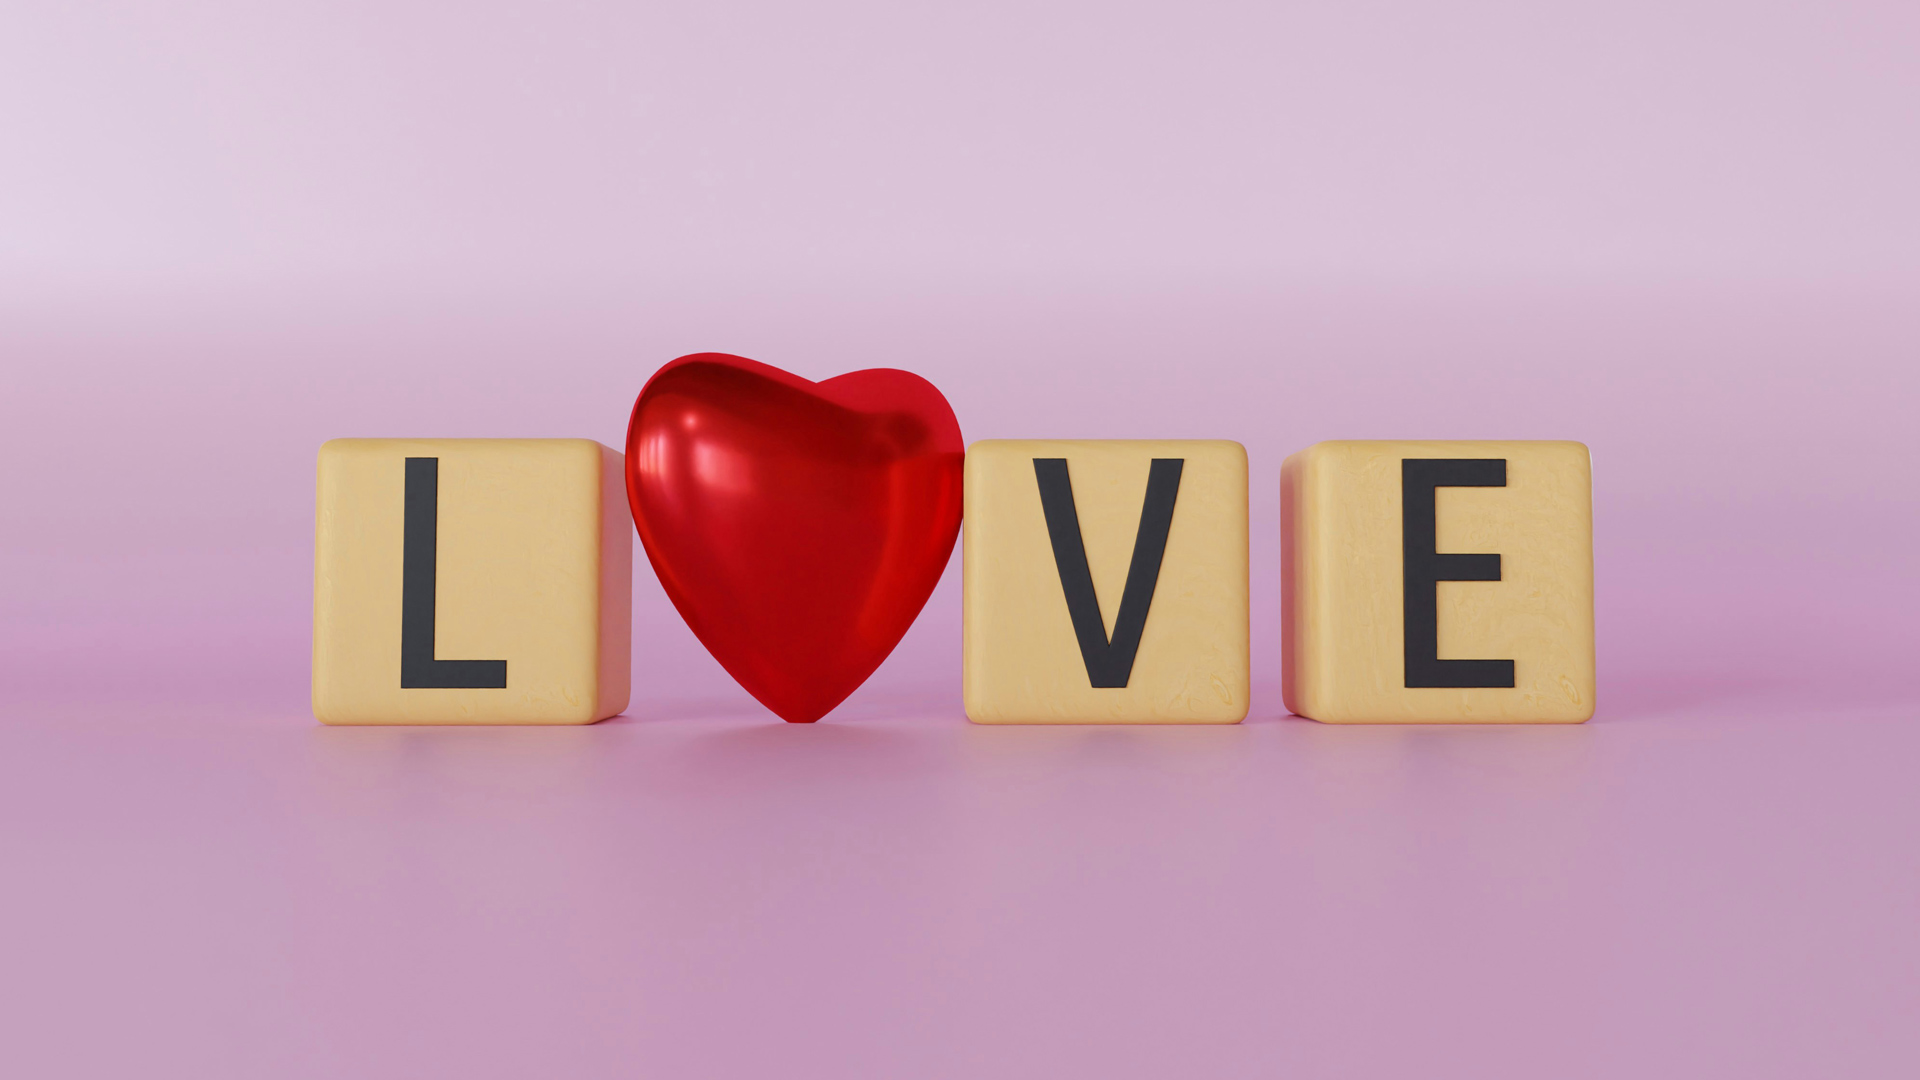 Wooden blocks arranged to spell 'Love' with a red heart replacing the 'O' on a pink background